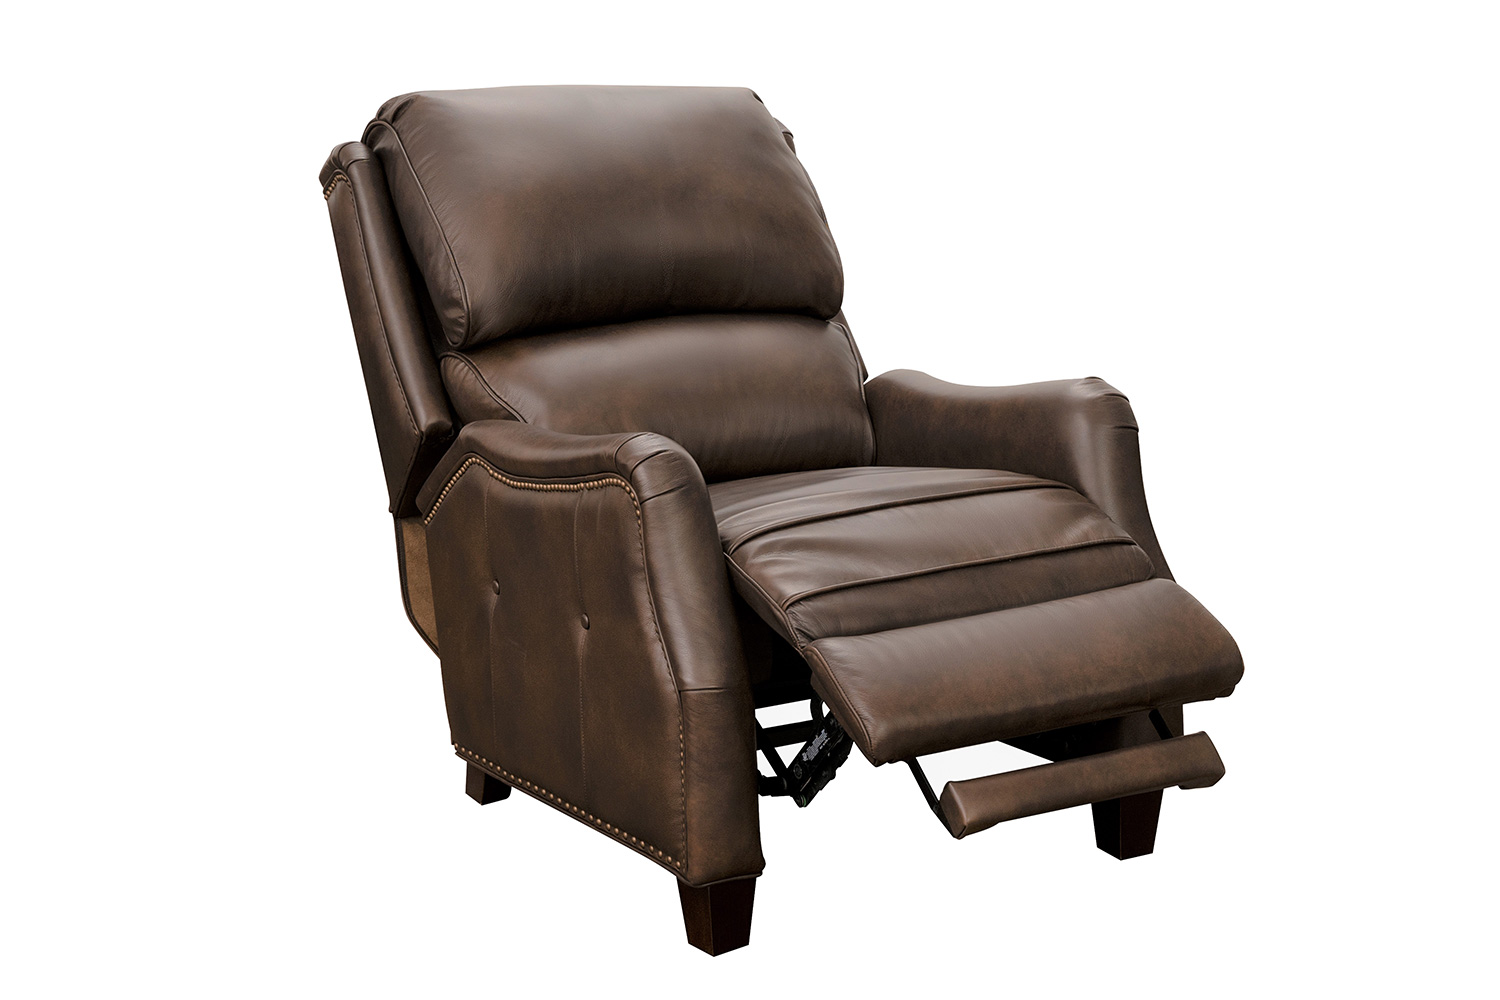 Barcalounger Morrison Big and Tall Recliner Chair - Ashford Walnut/All Leather